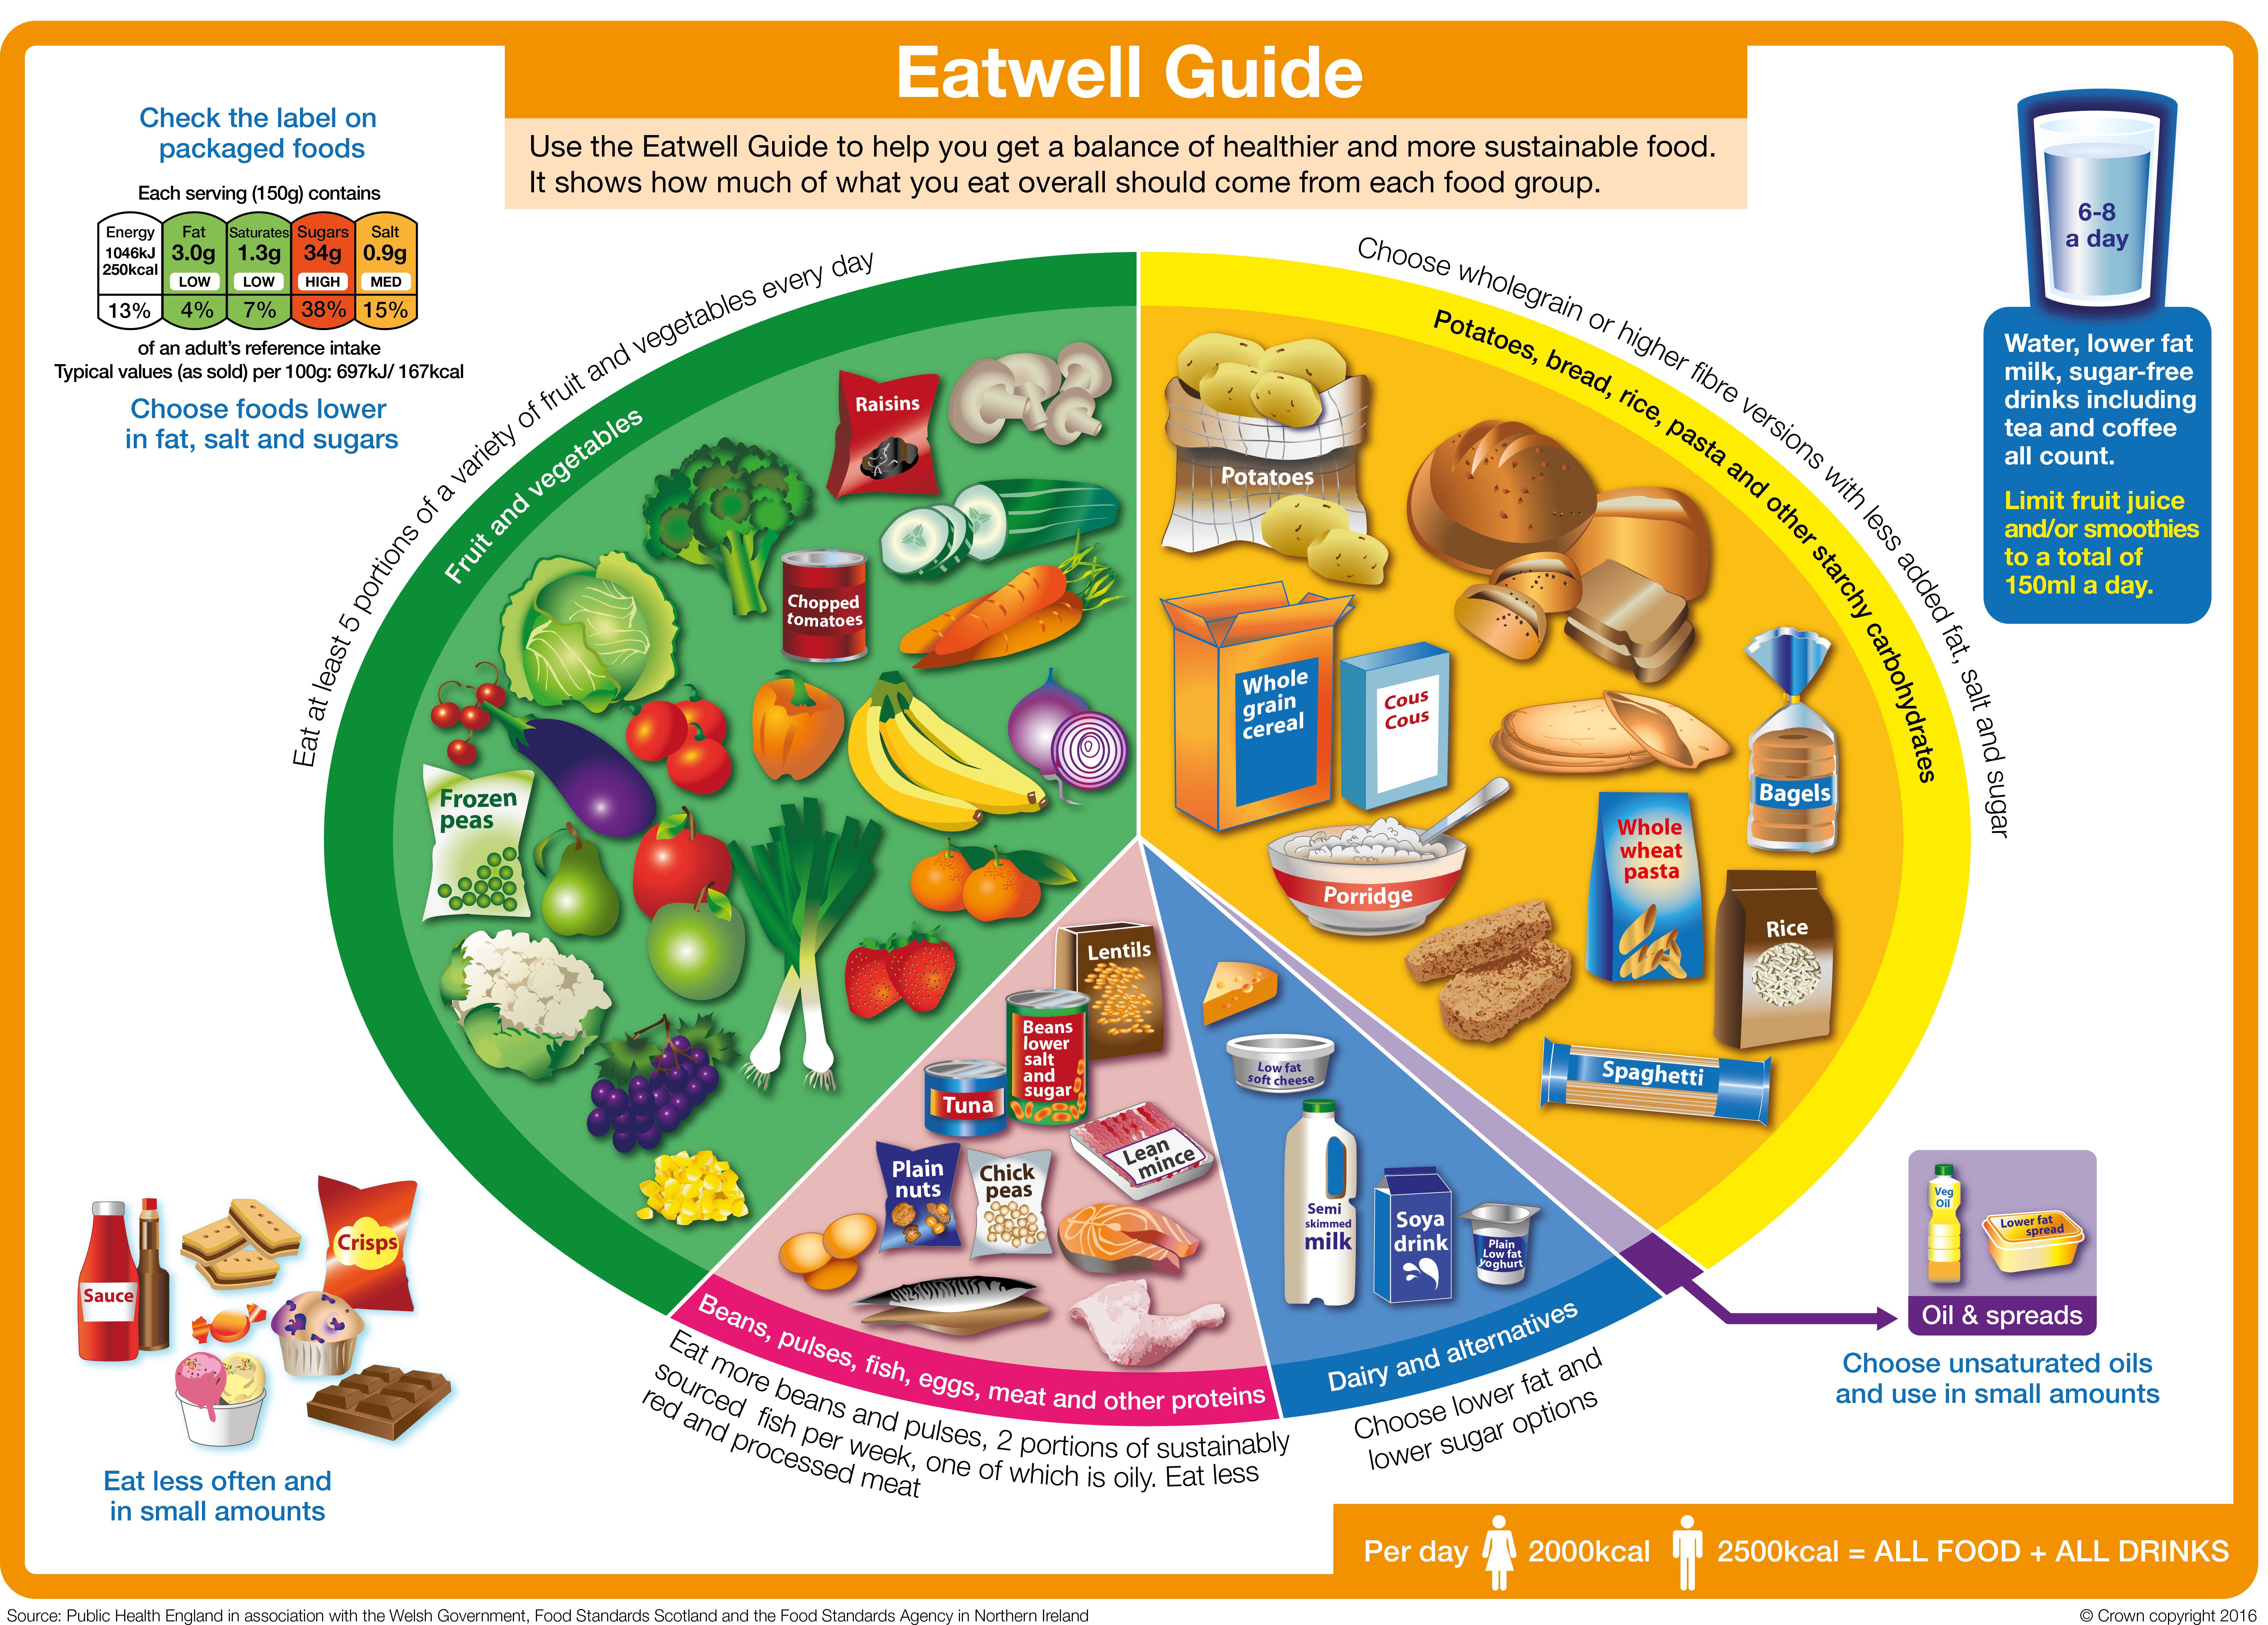 The new Eatwell Guide 